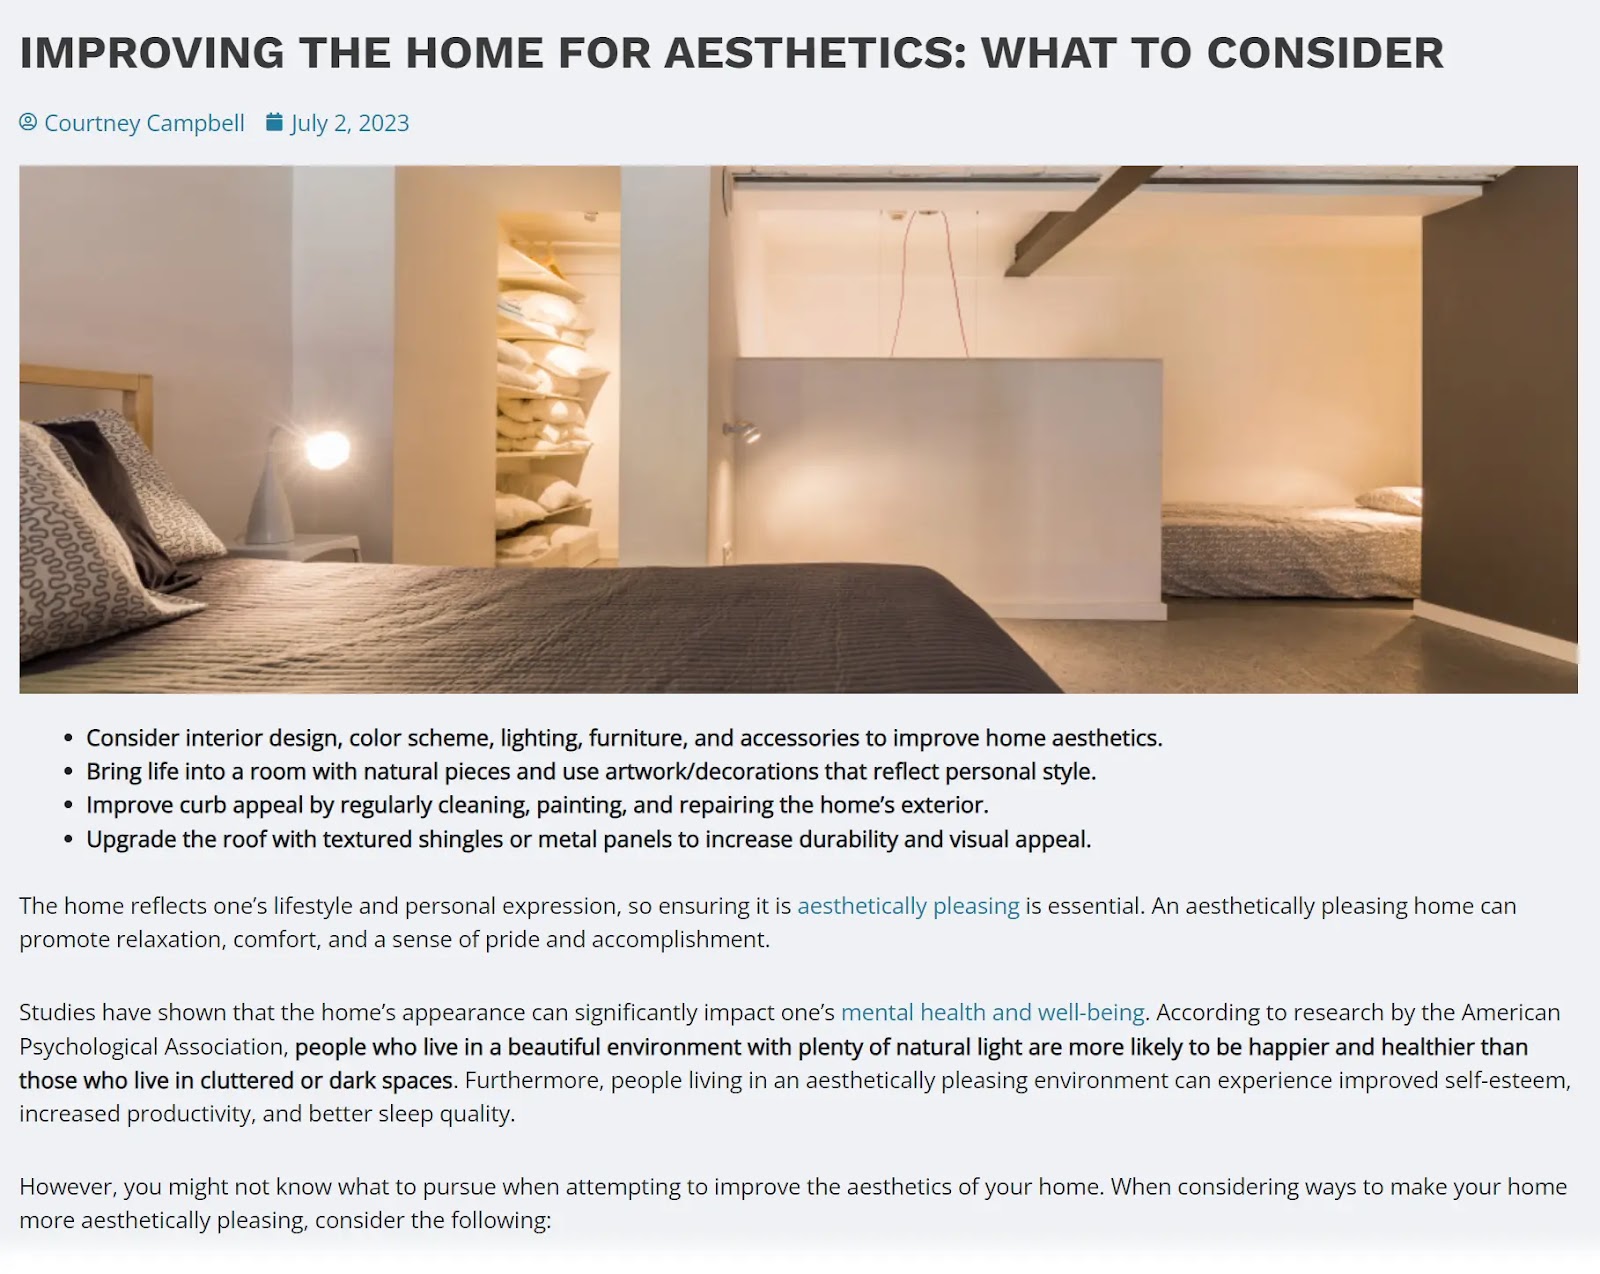 "Improving the home for aesthetics: what to consider" article page